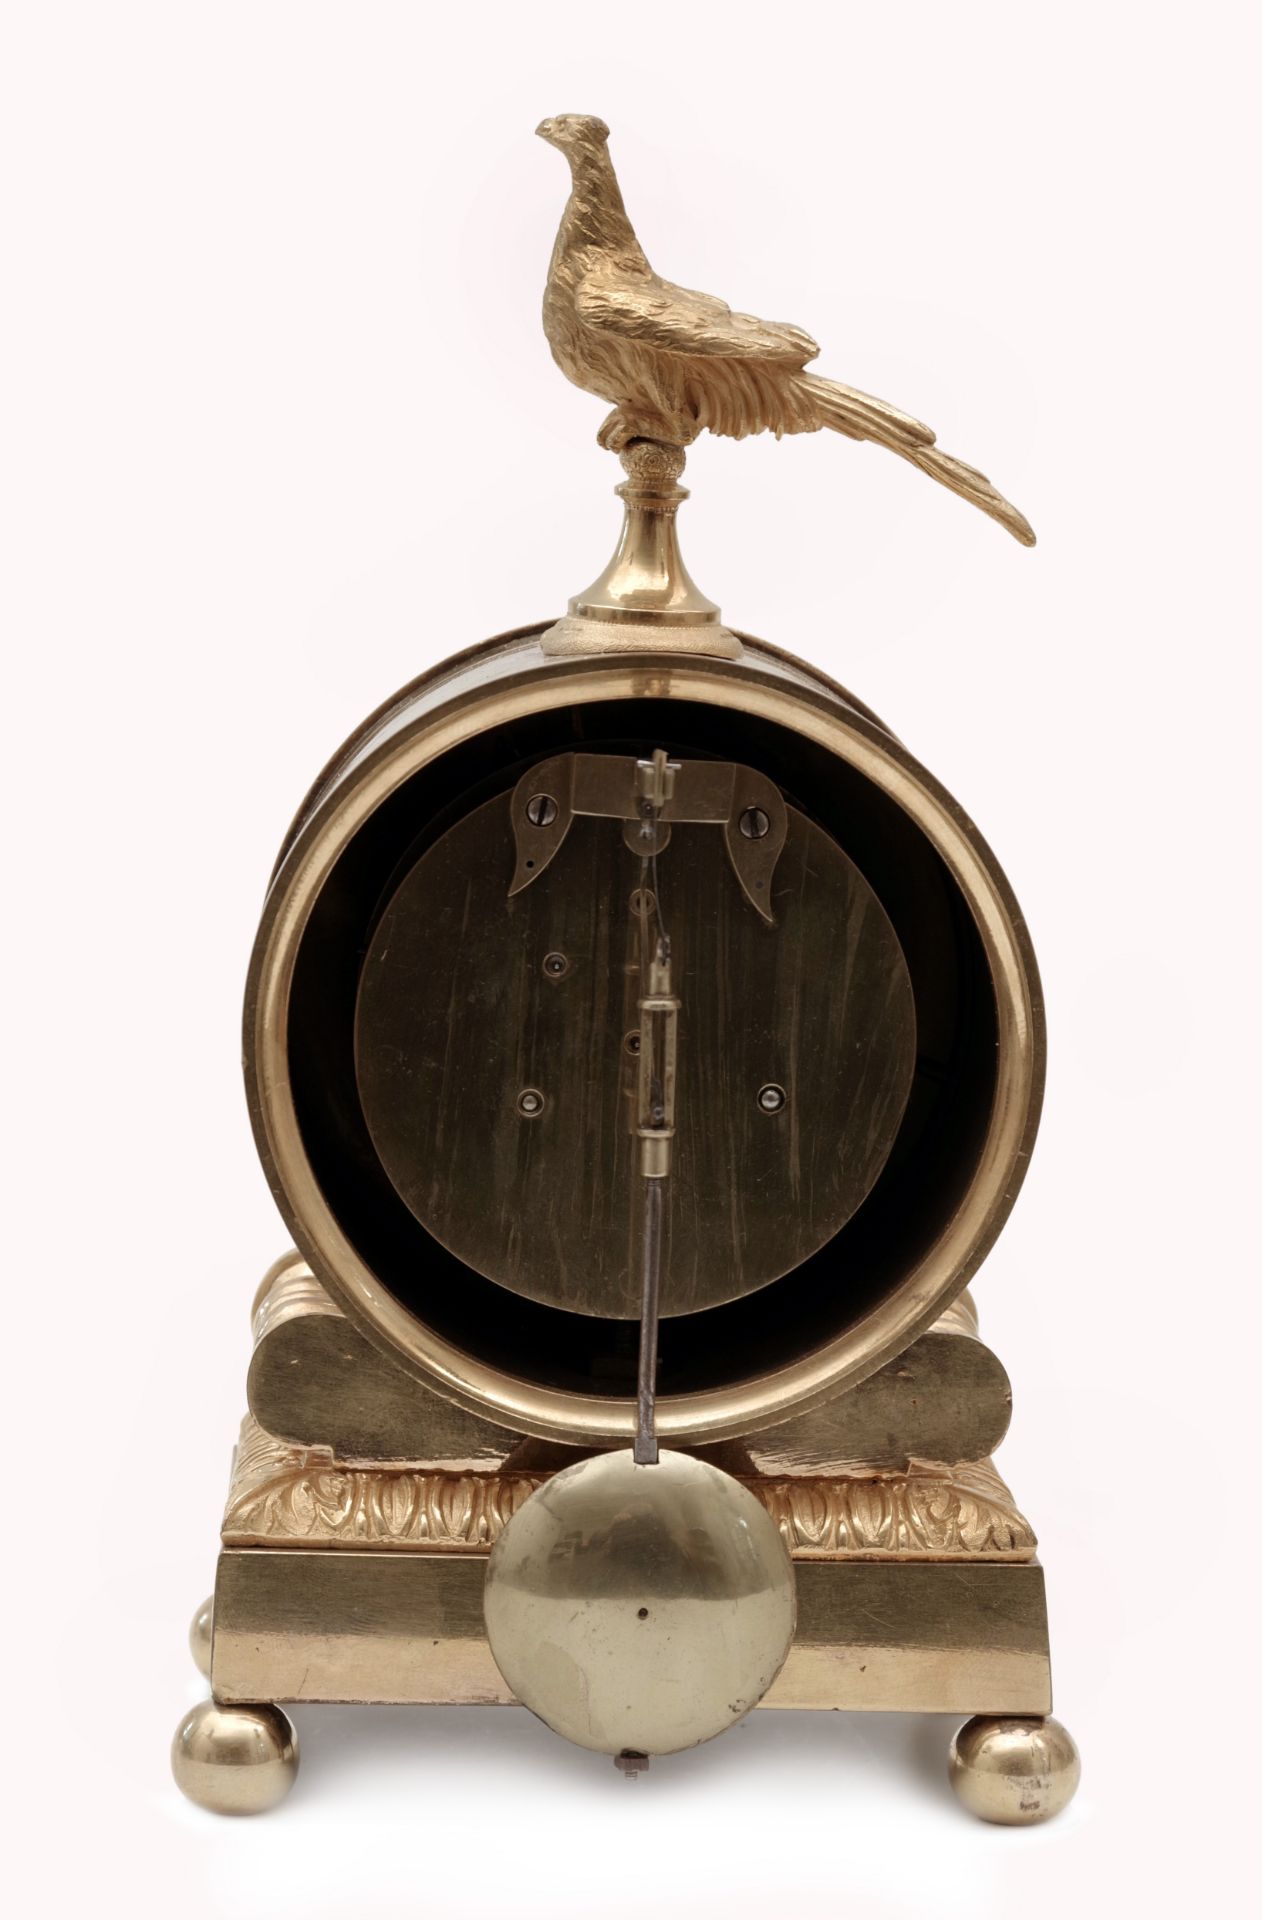 Small Empire-style clock - Image 3 of 4